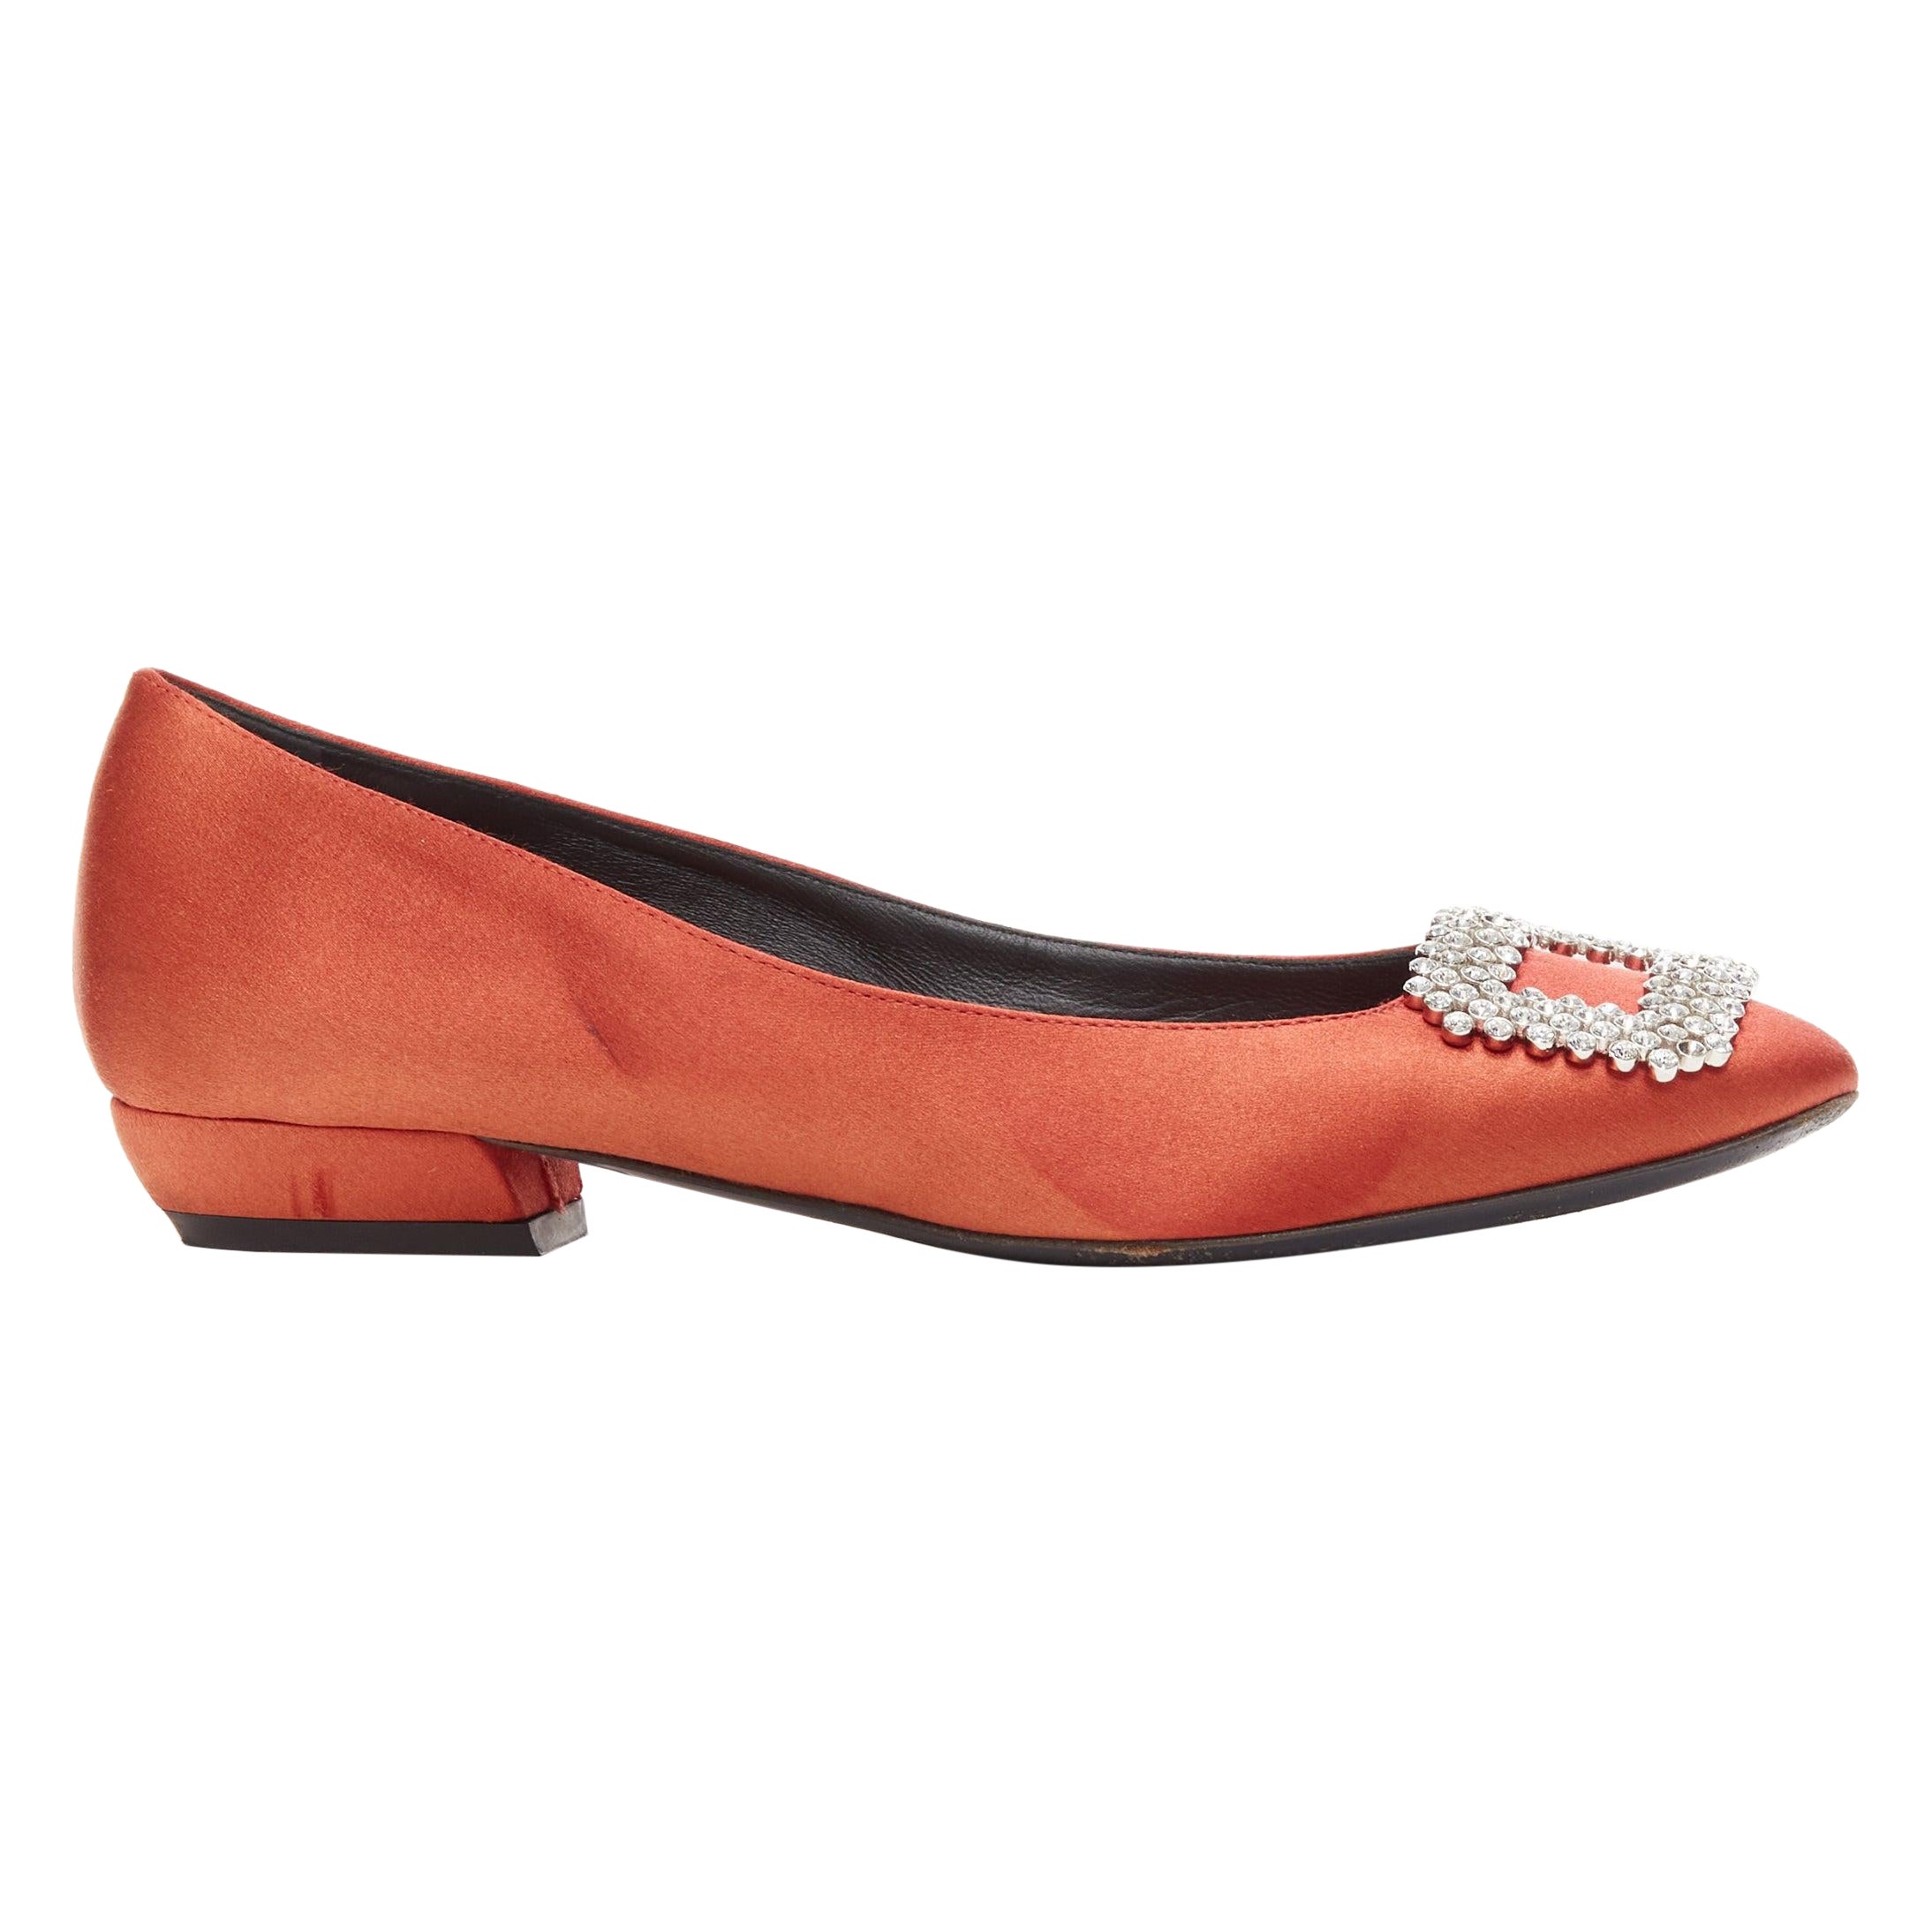 ROGER VIVIER red satin silver strass crystal buckle classic dress flats EU36.5 For Sale